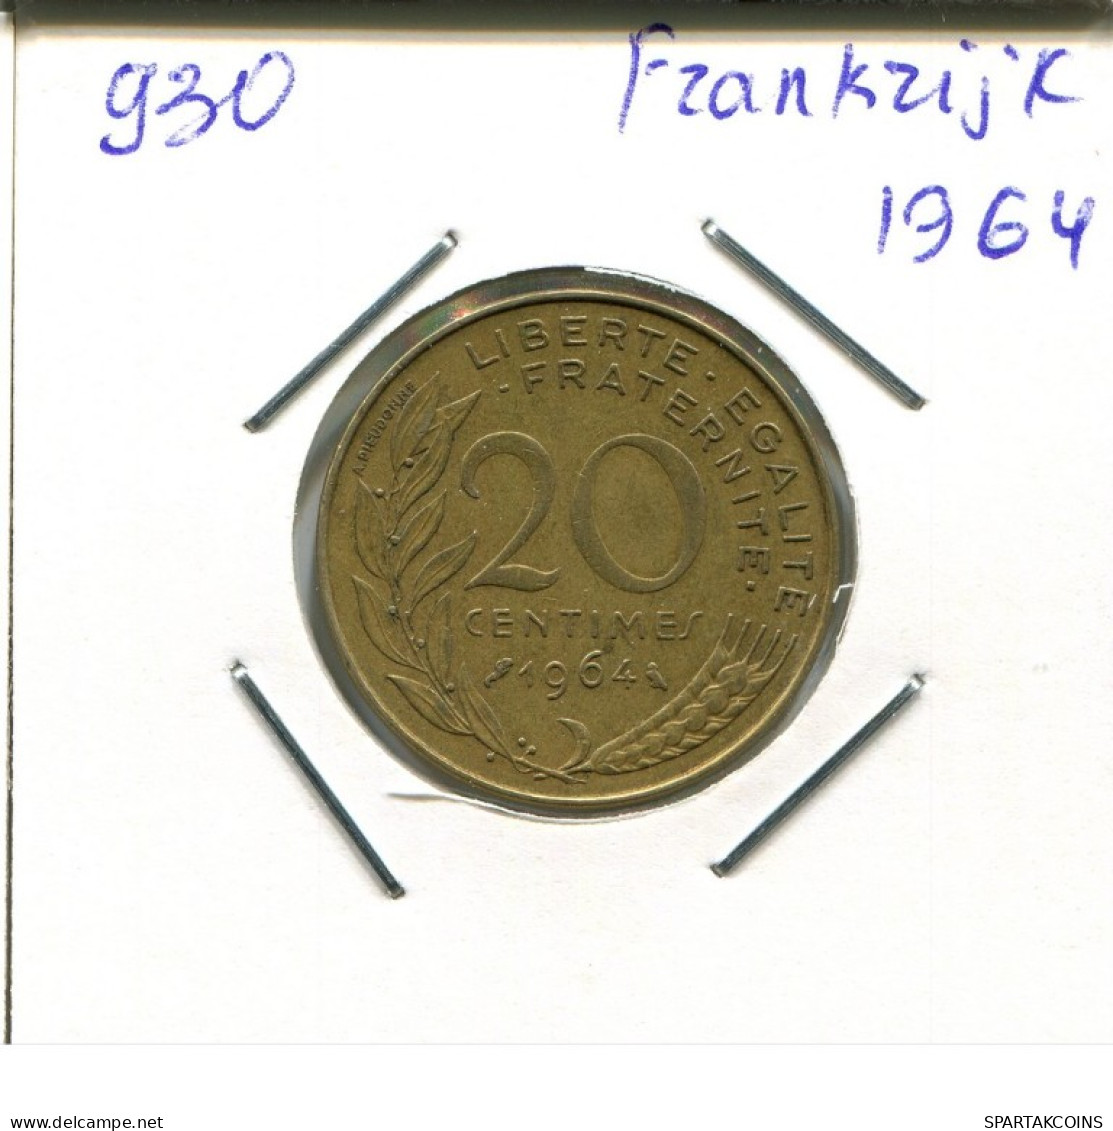 20 CENTIMES 1964 FRANCE Coin French Coin #AN168.U.A - 20 Centimes